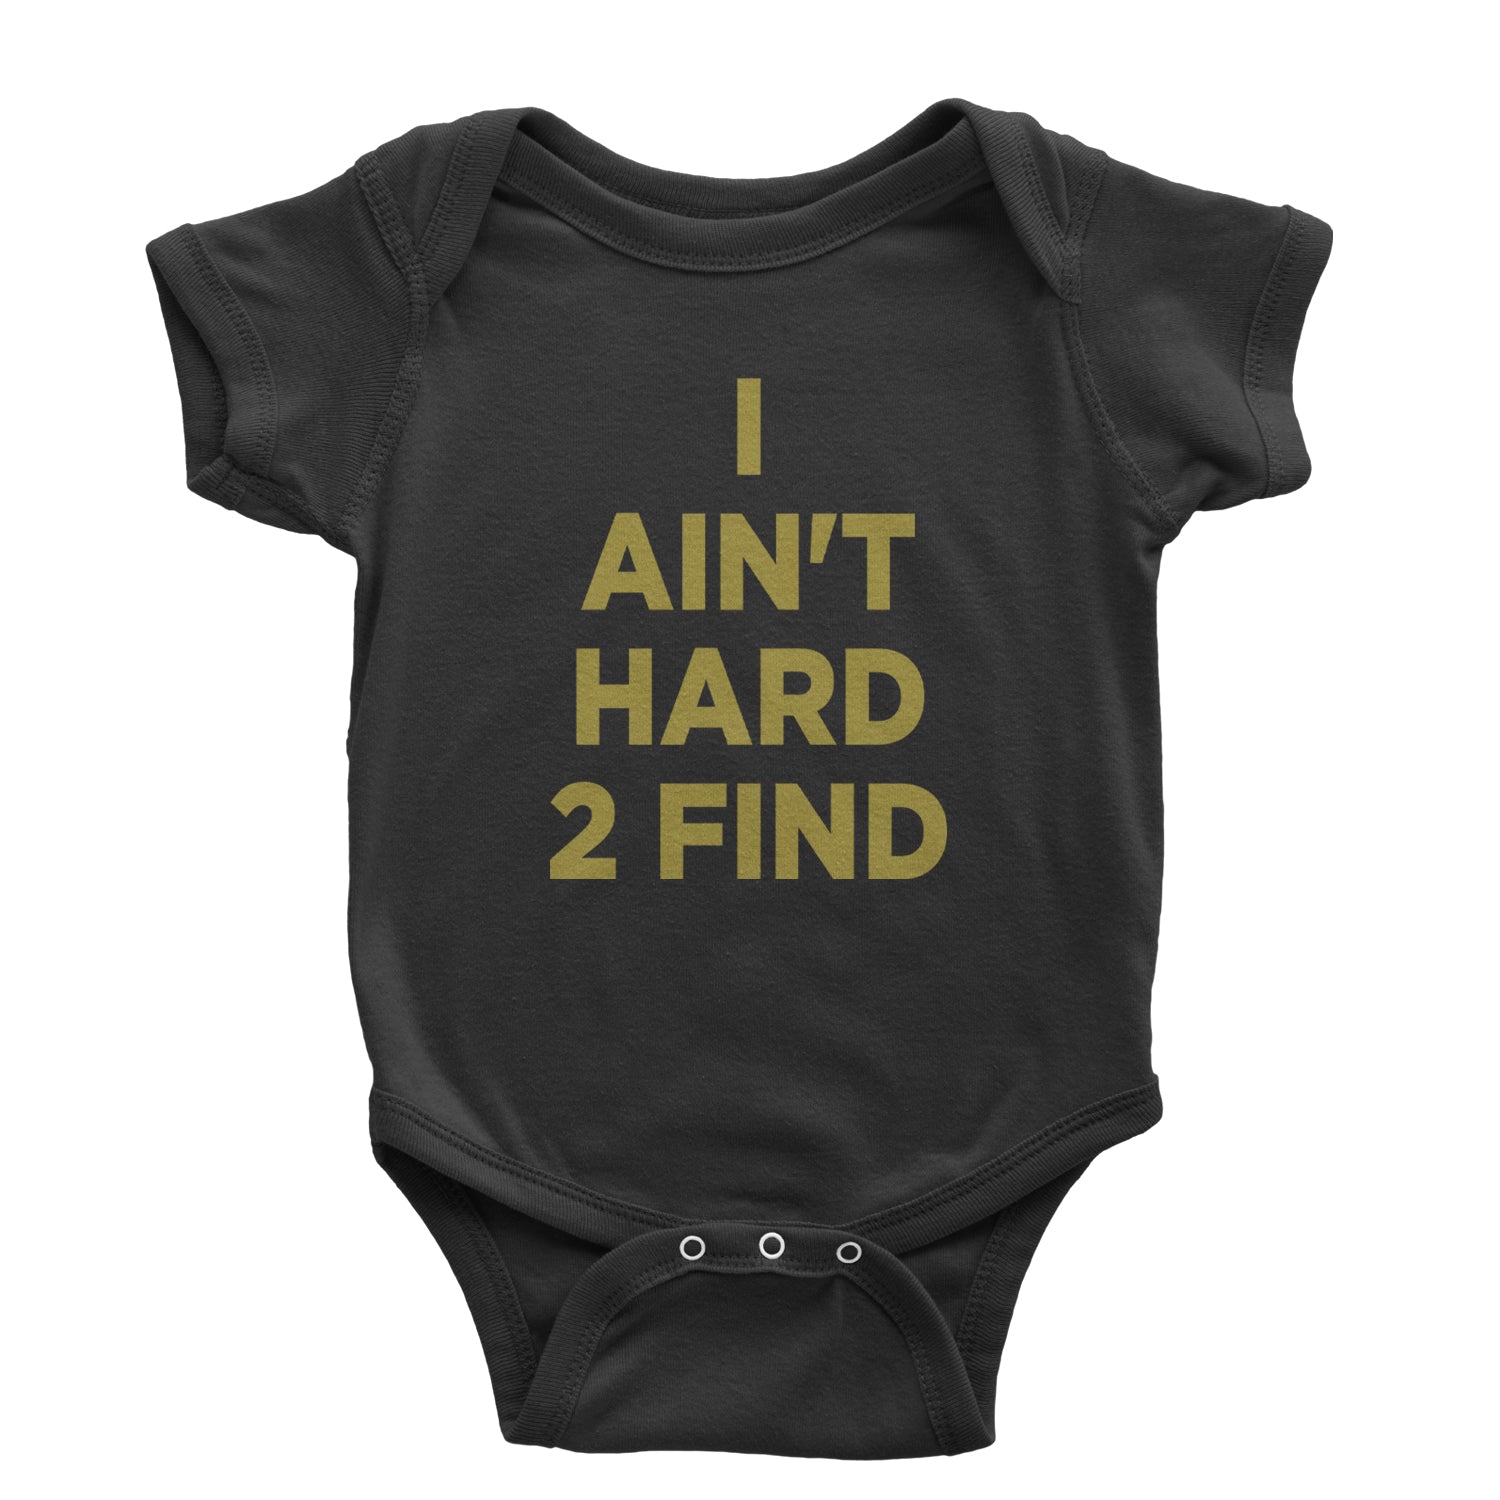 I Ain't Hard To Find Coach Prime Infant One-Piece Romper Bodysuit and Toddler T-shirt